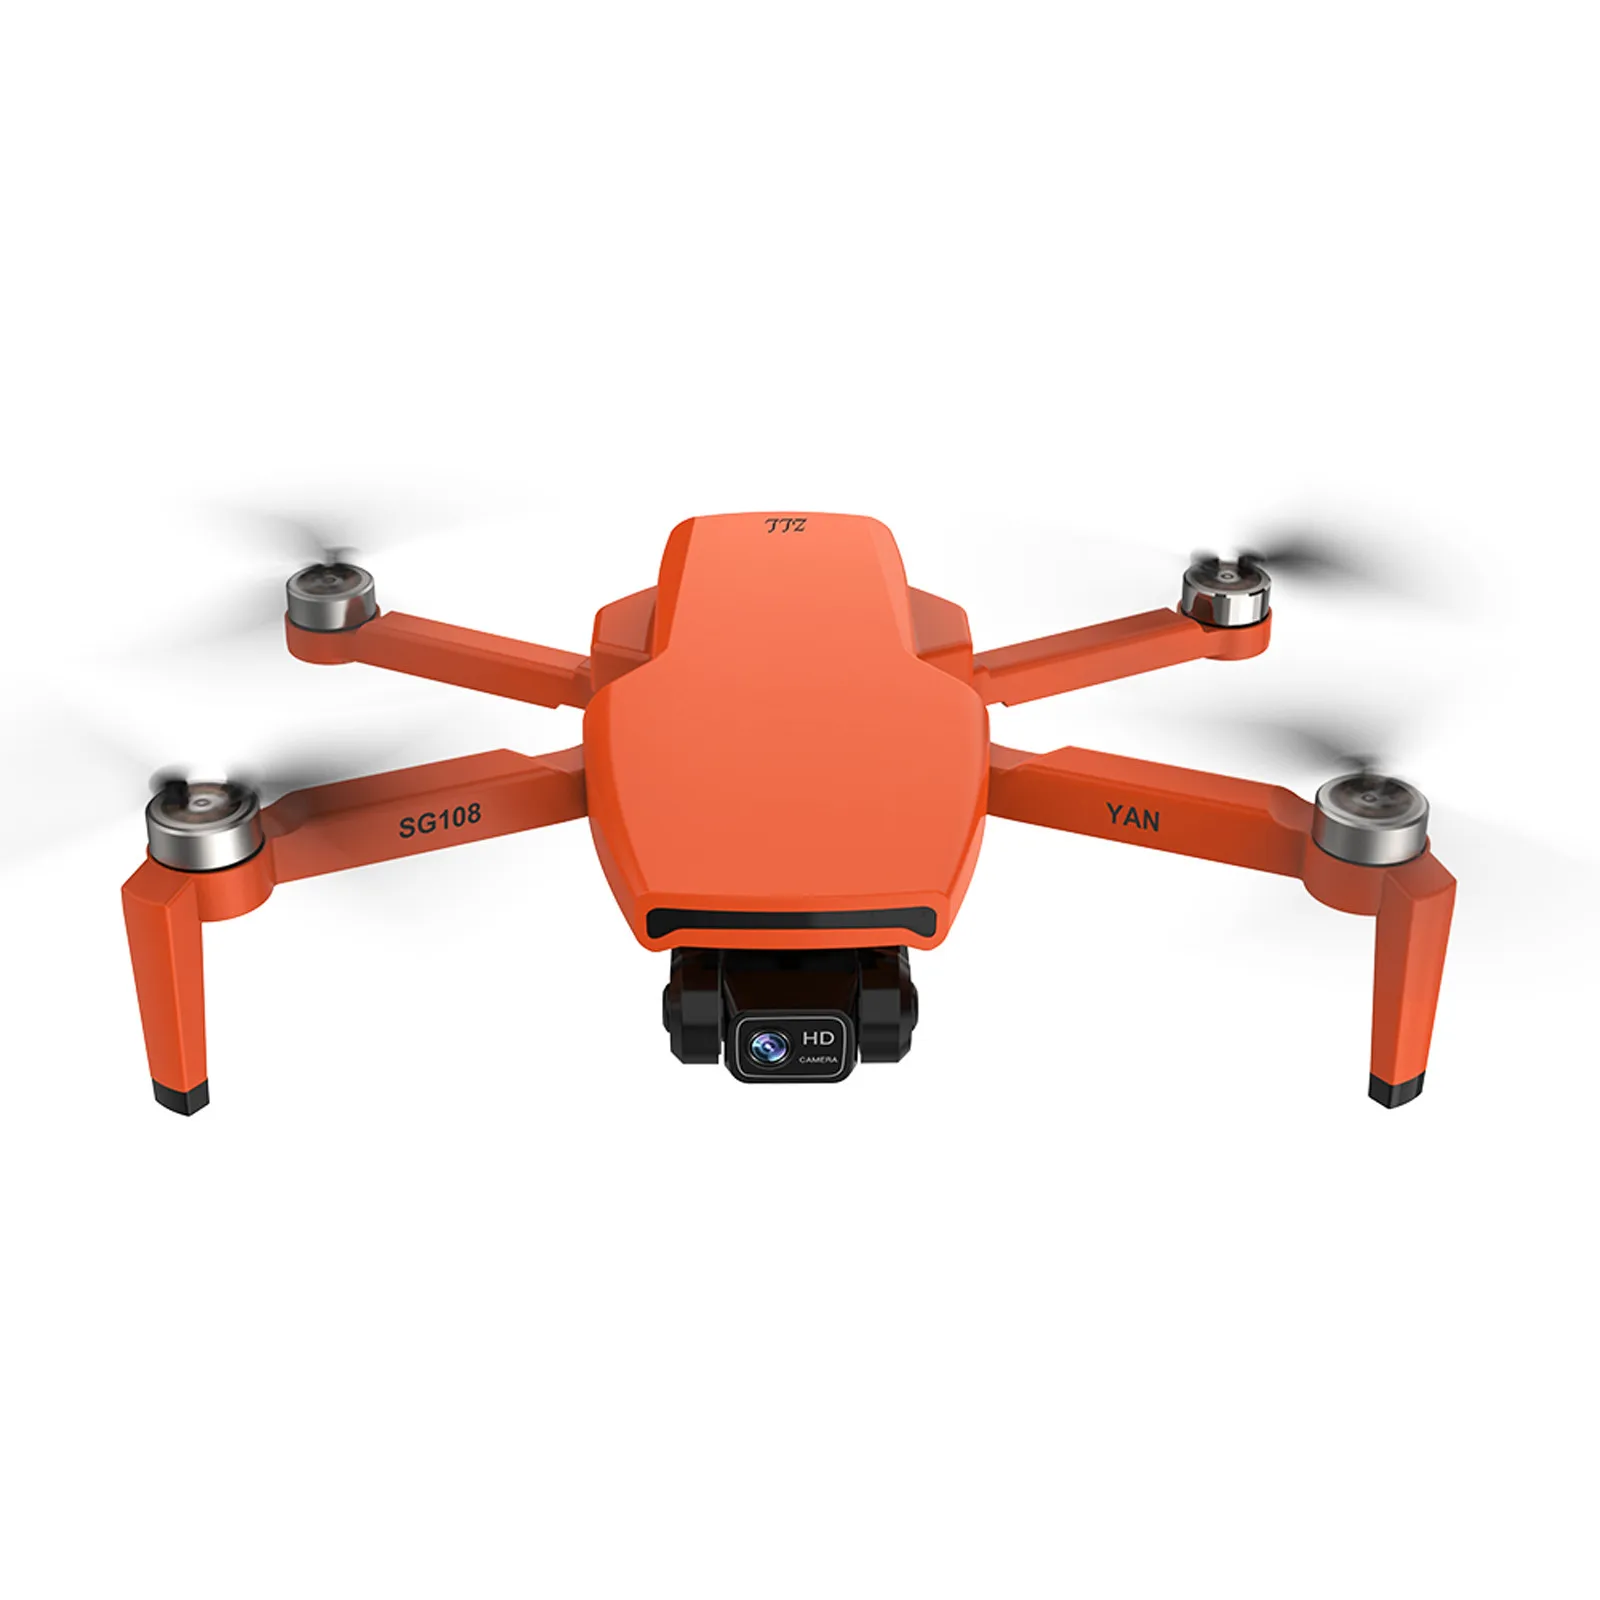 

New ZLRC SG108 pro Drone 4K Professional Camera 2-axis Gimbal Brushless 5G WIFI FPV Rc Quadcopter 26 minutes Distance 1.2km Dron, Black / orange